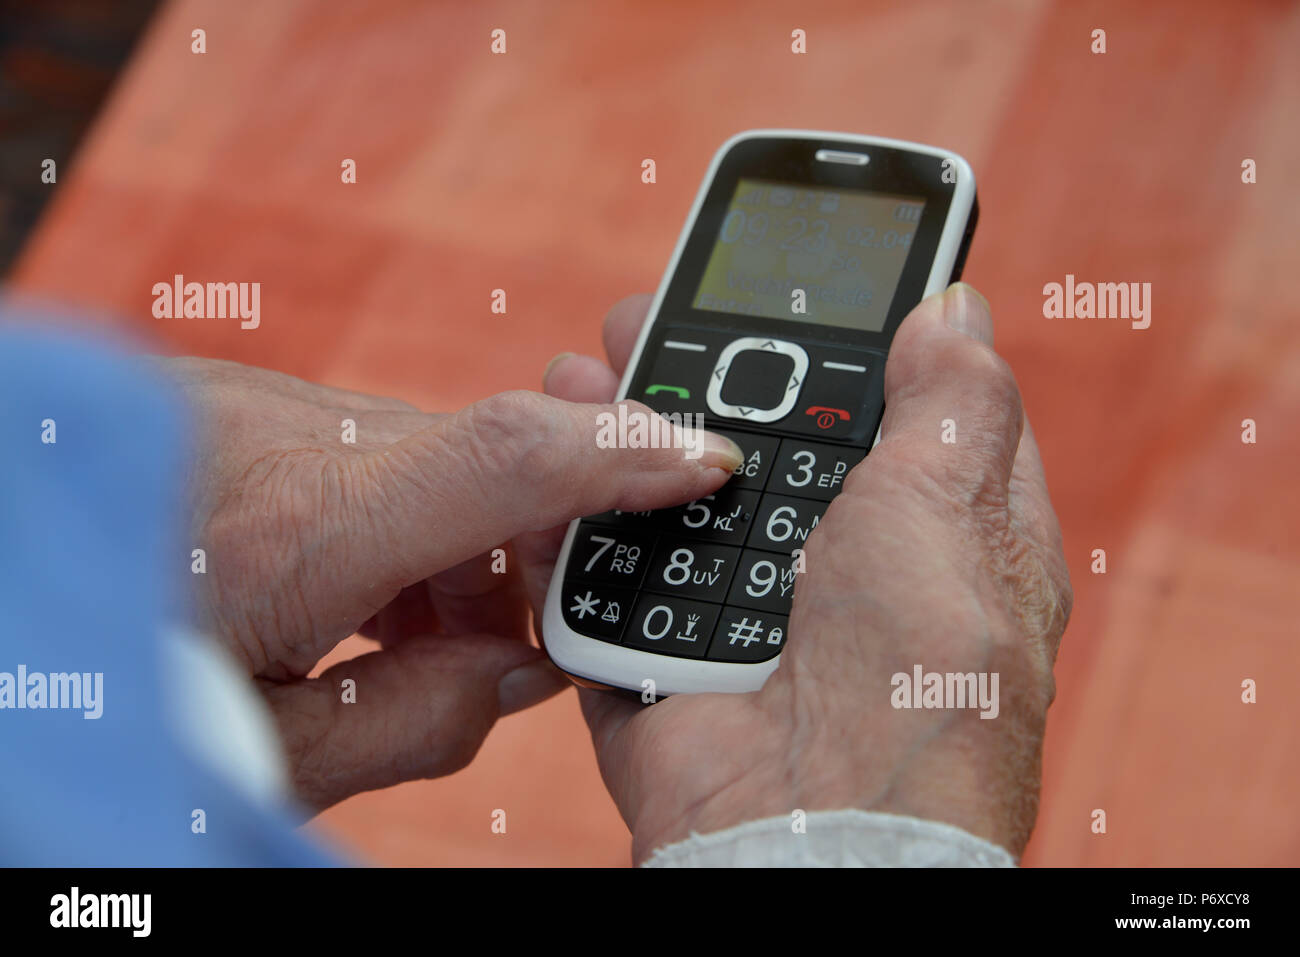 cell phone in old woman's hands Stock Photo